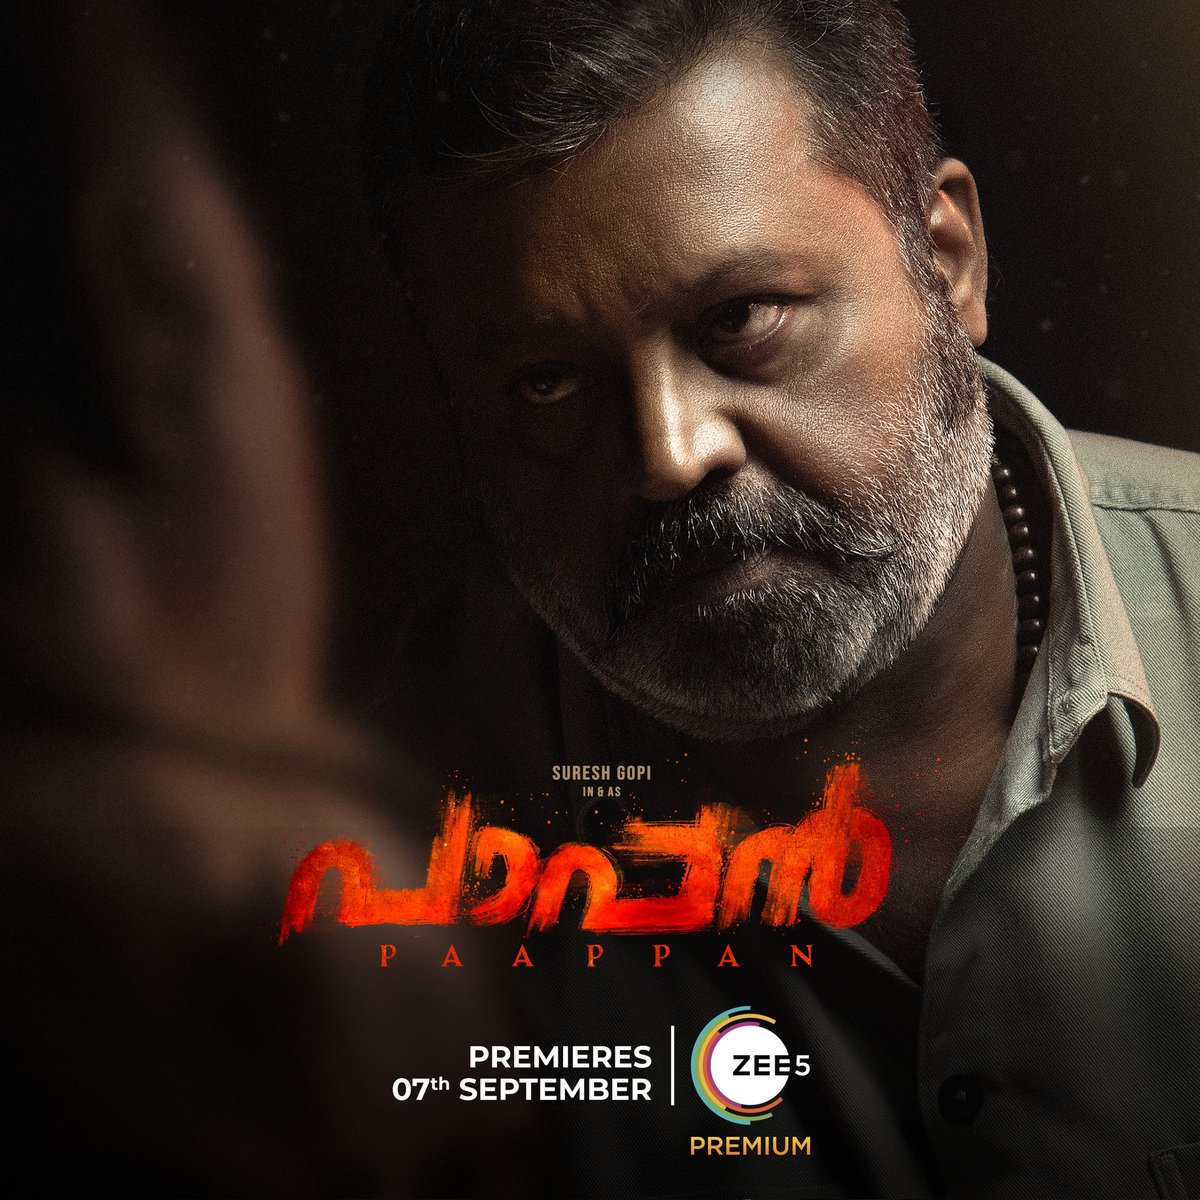 Malayalam film #Paappan will premiere on ZEE5 Premium on September 7th.